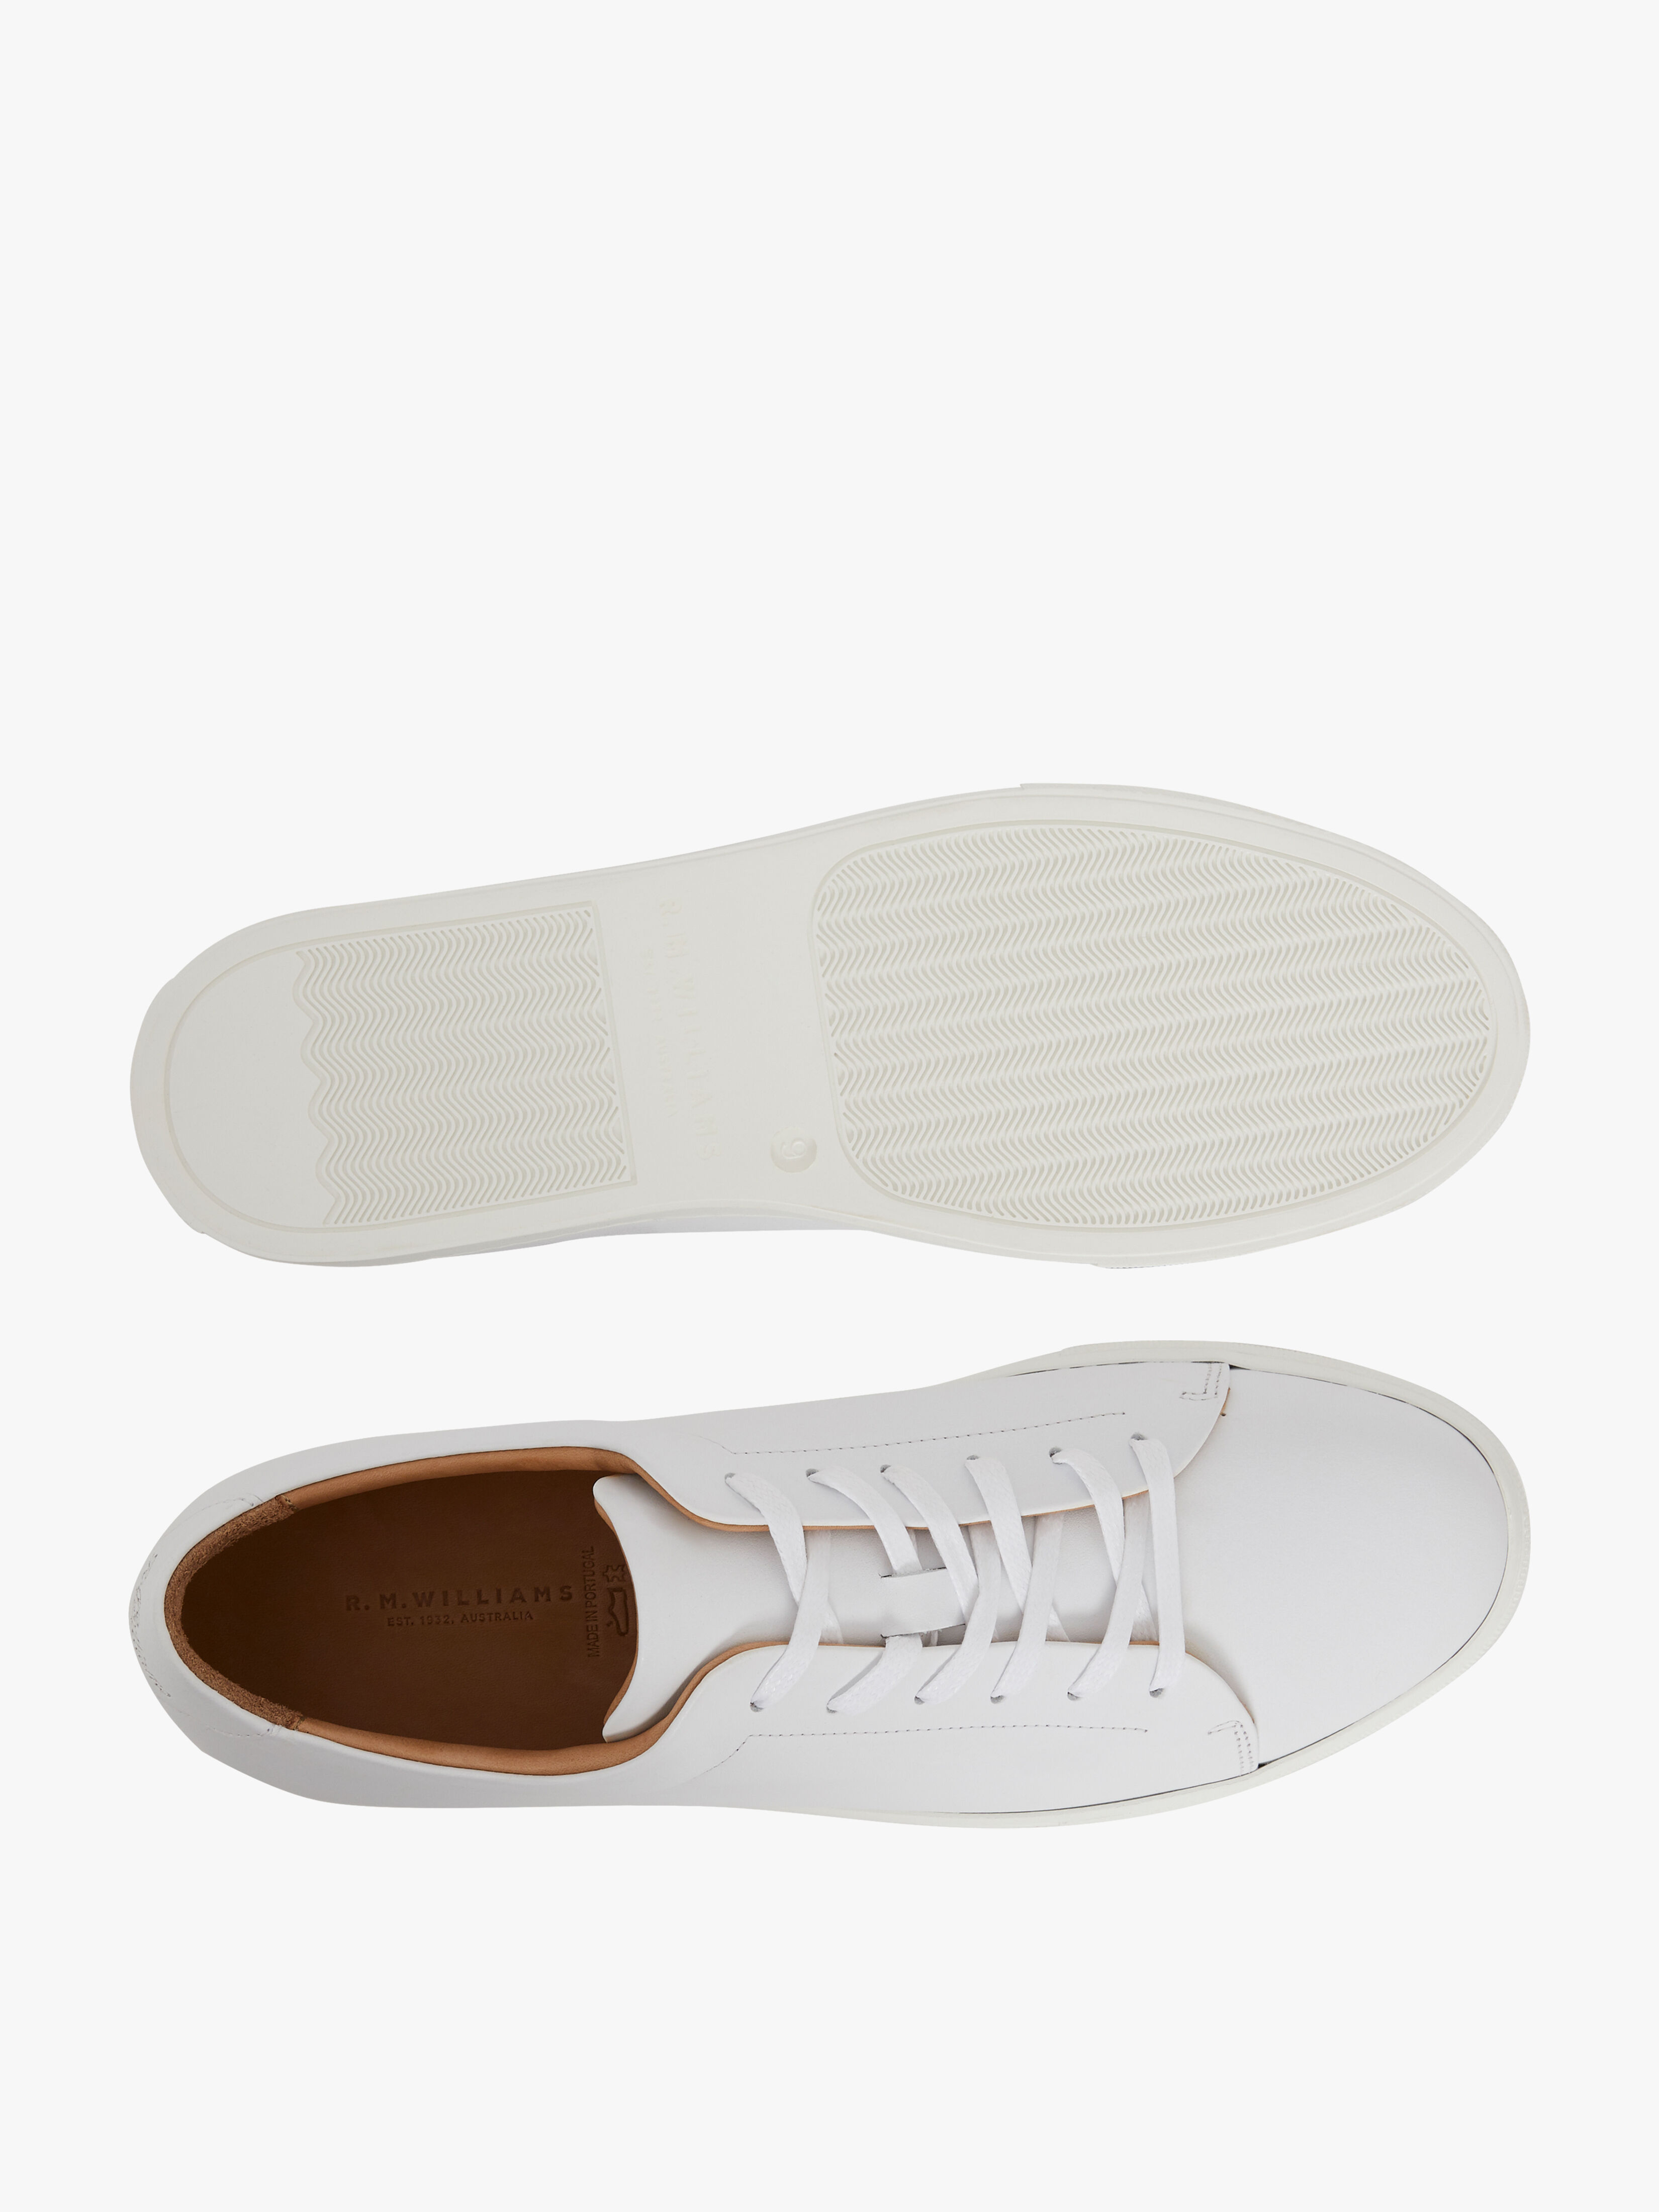 rm williams sneakers